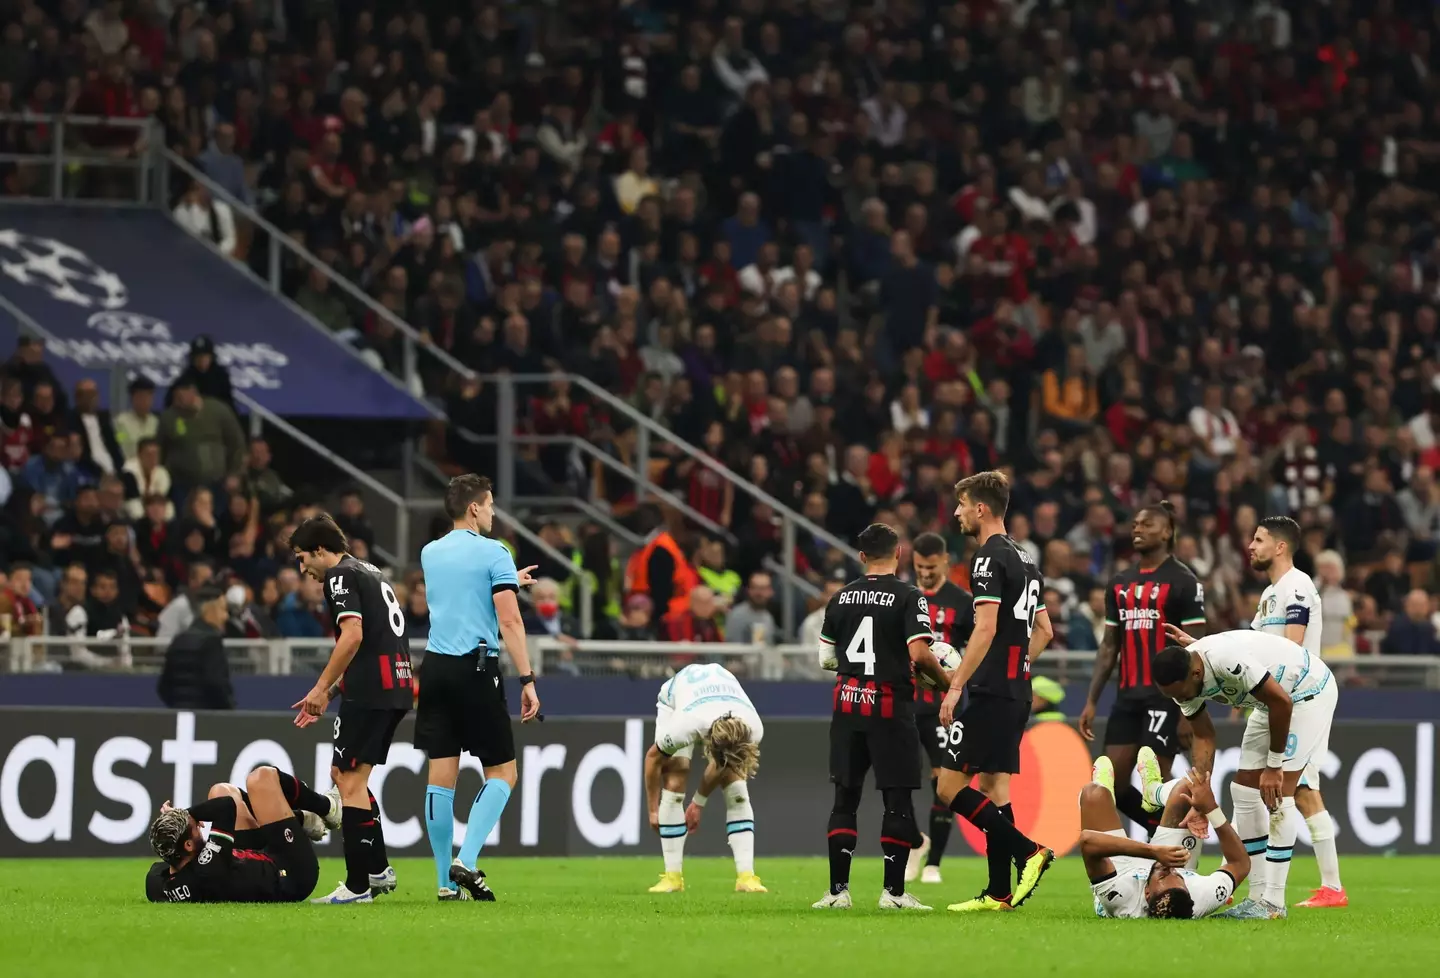 Chelsea’s Reece James and AC Milan's Theo Hernandez react after clashing during the UEFA Champions League. (Alamy)